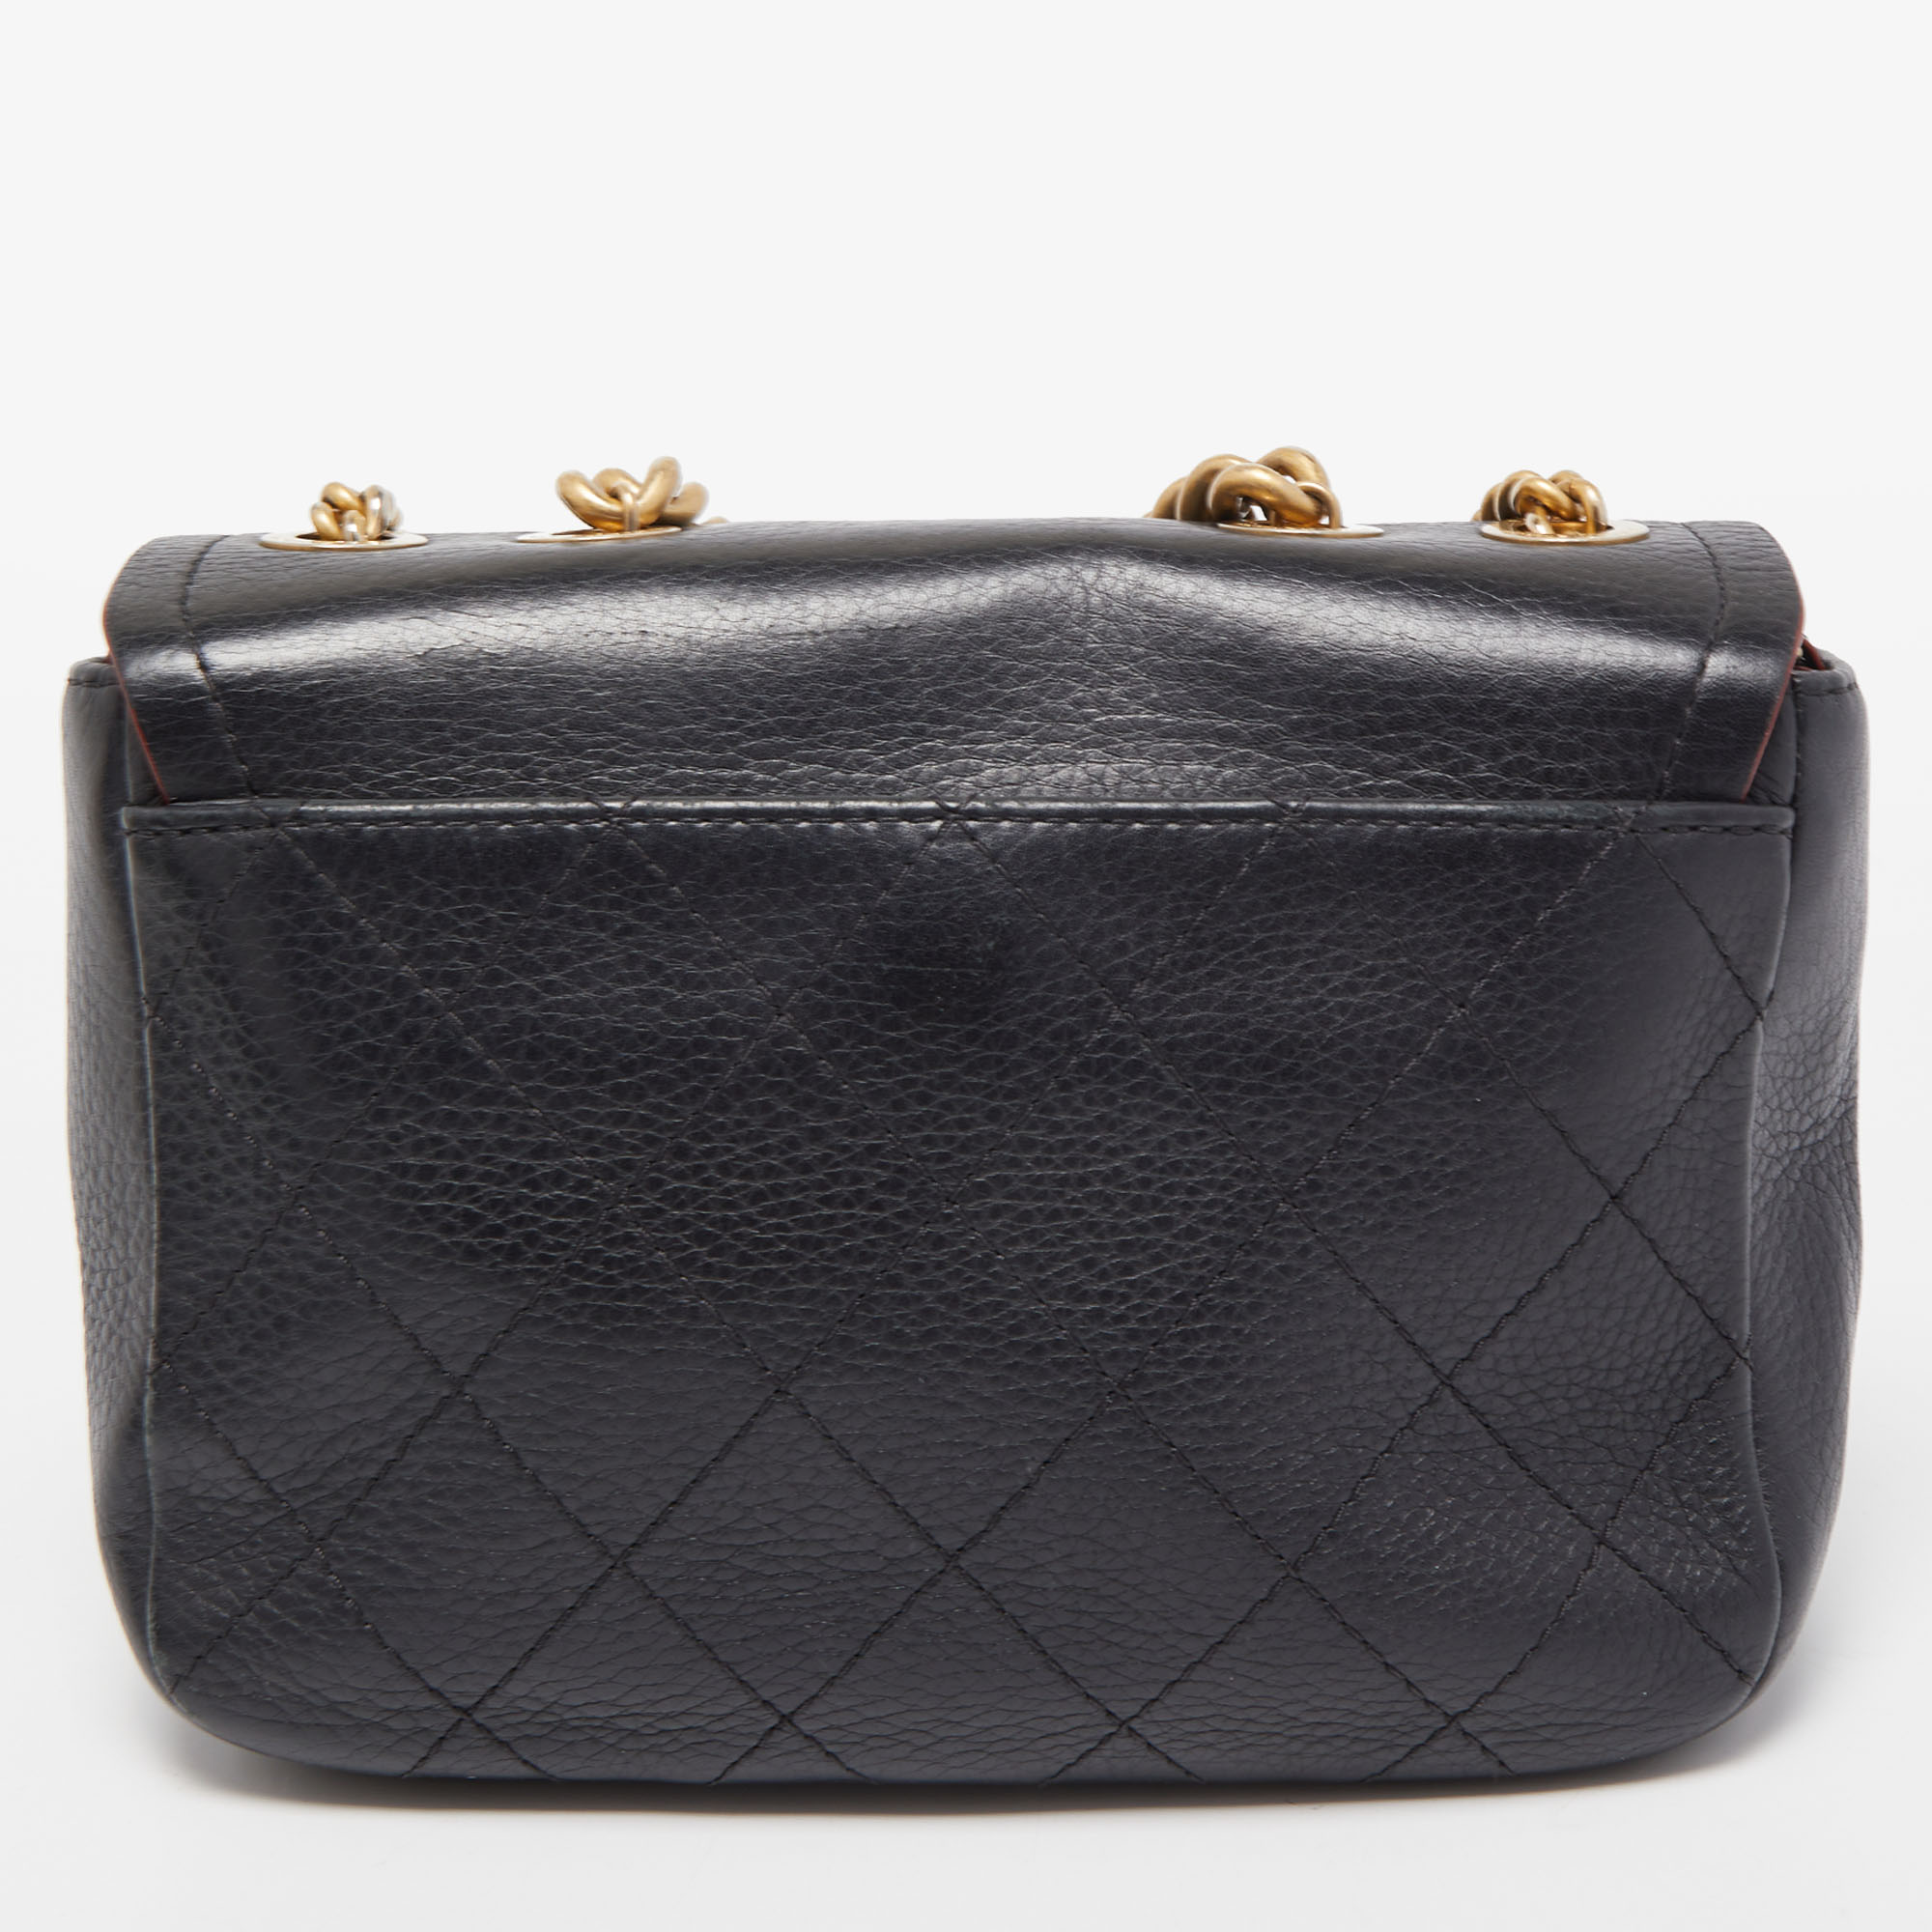 Chanel Black Quilted Leather Archi Chic Flap Bag